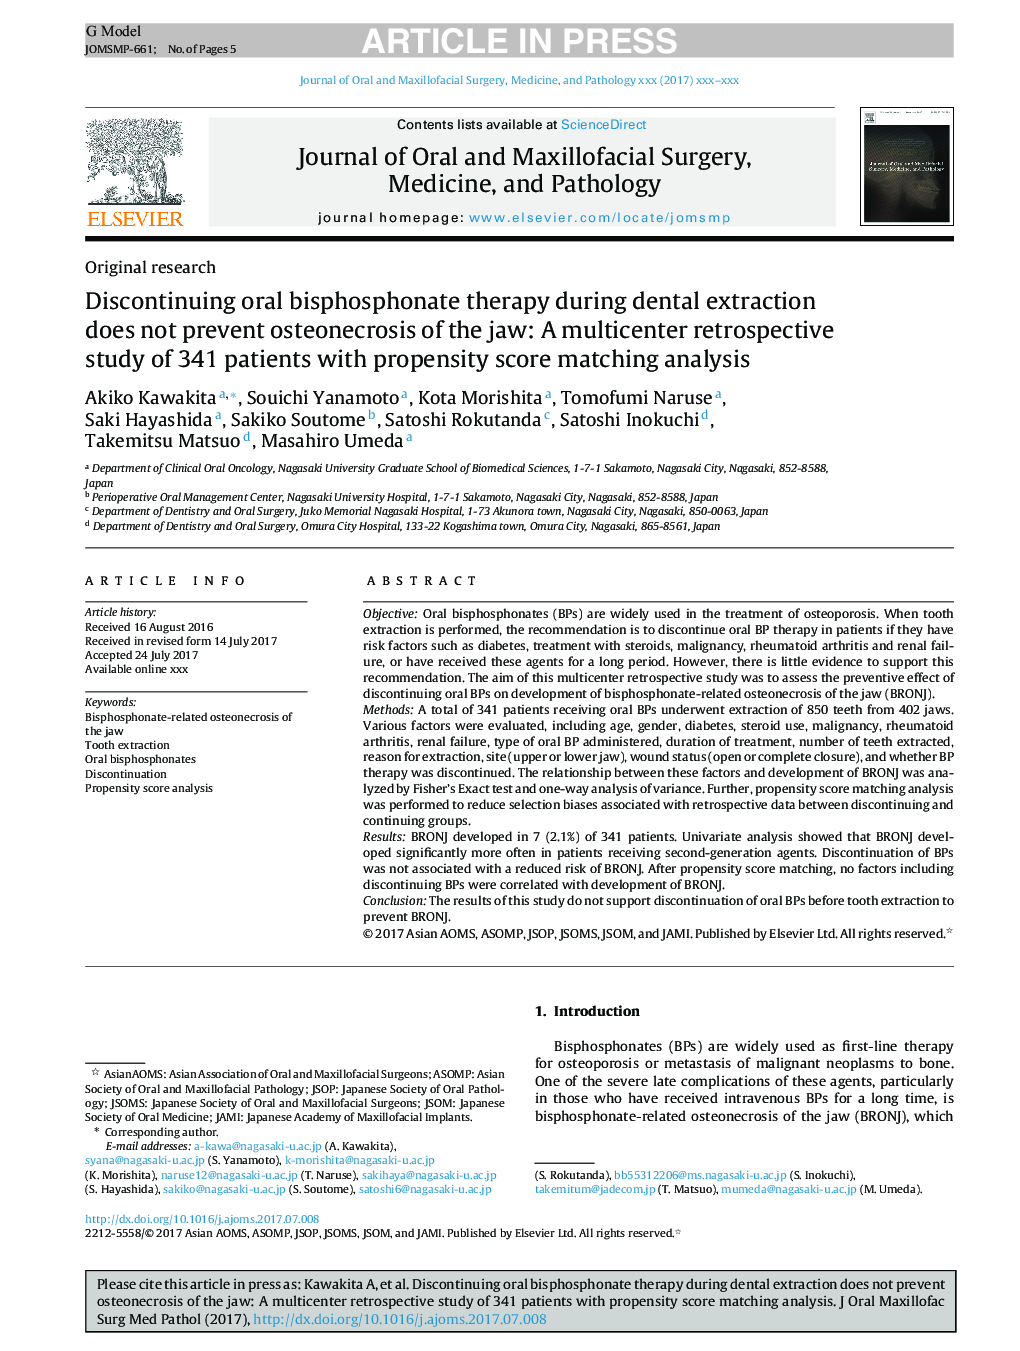 Discontinuing oral bisphosphonate therapy during dental extraction does not prevent osteonecrosis of the jaw: A multicenter retrospective study of 341 patients with propensity score matching analysis